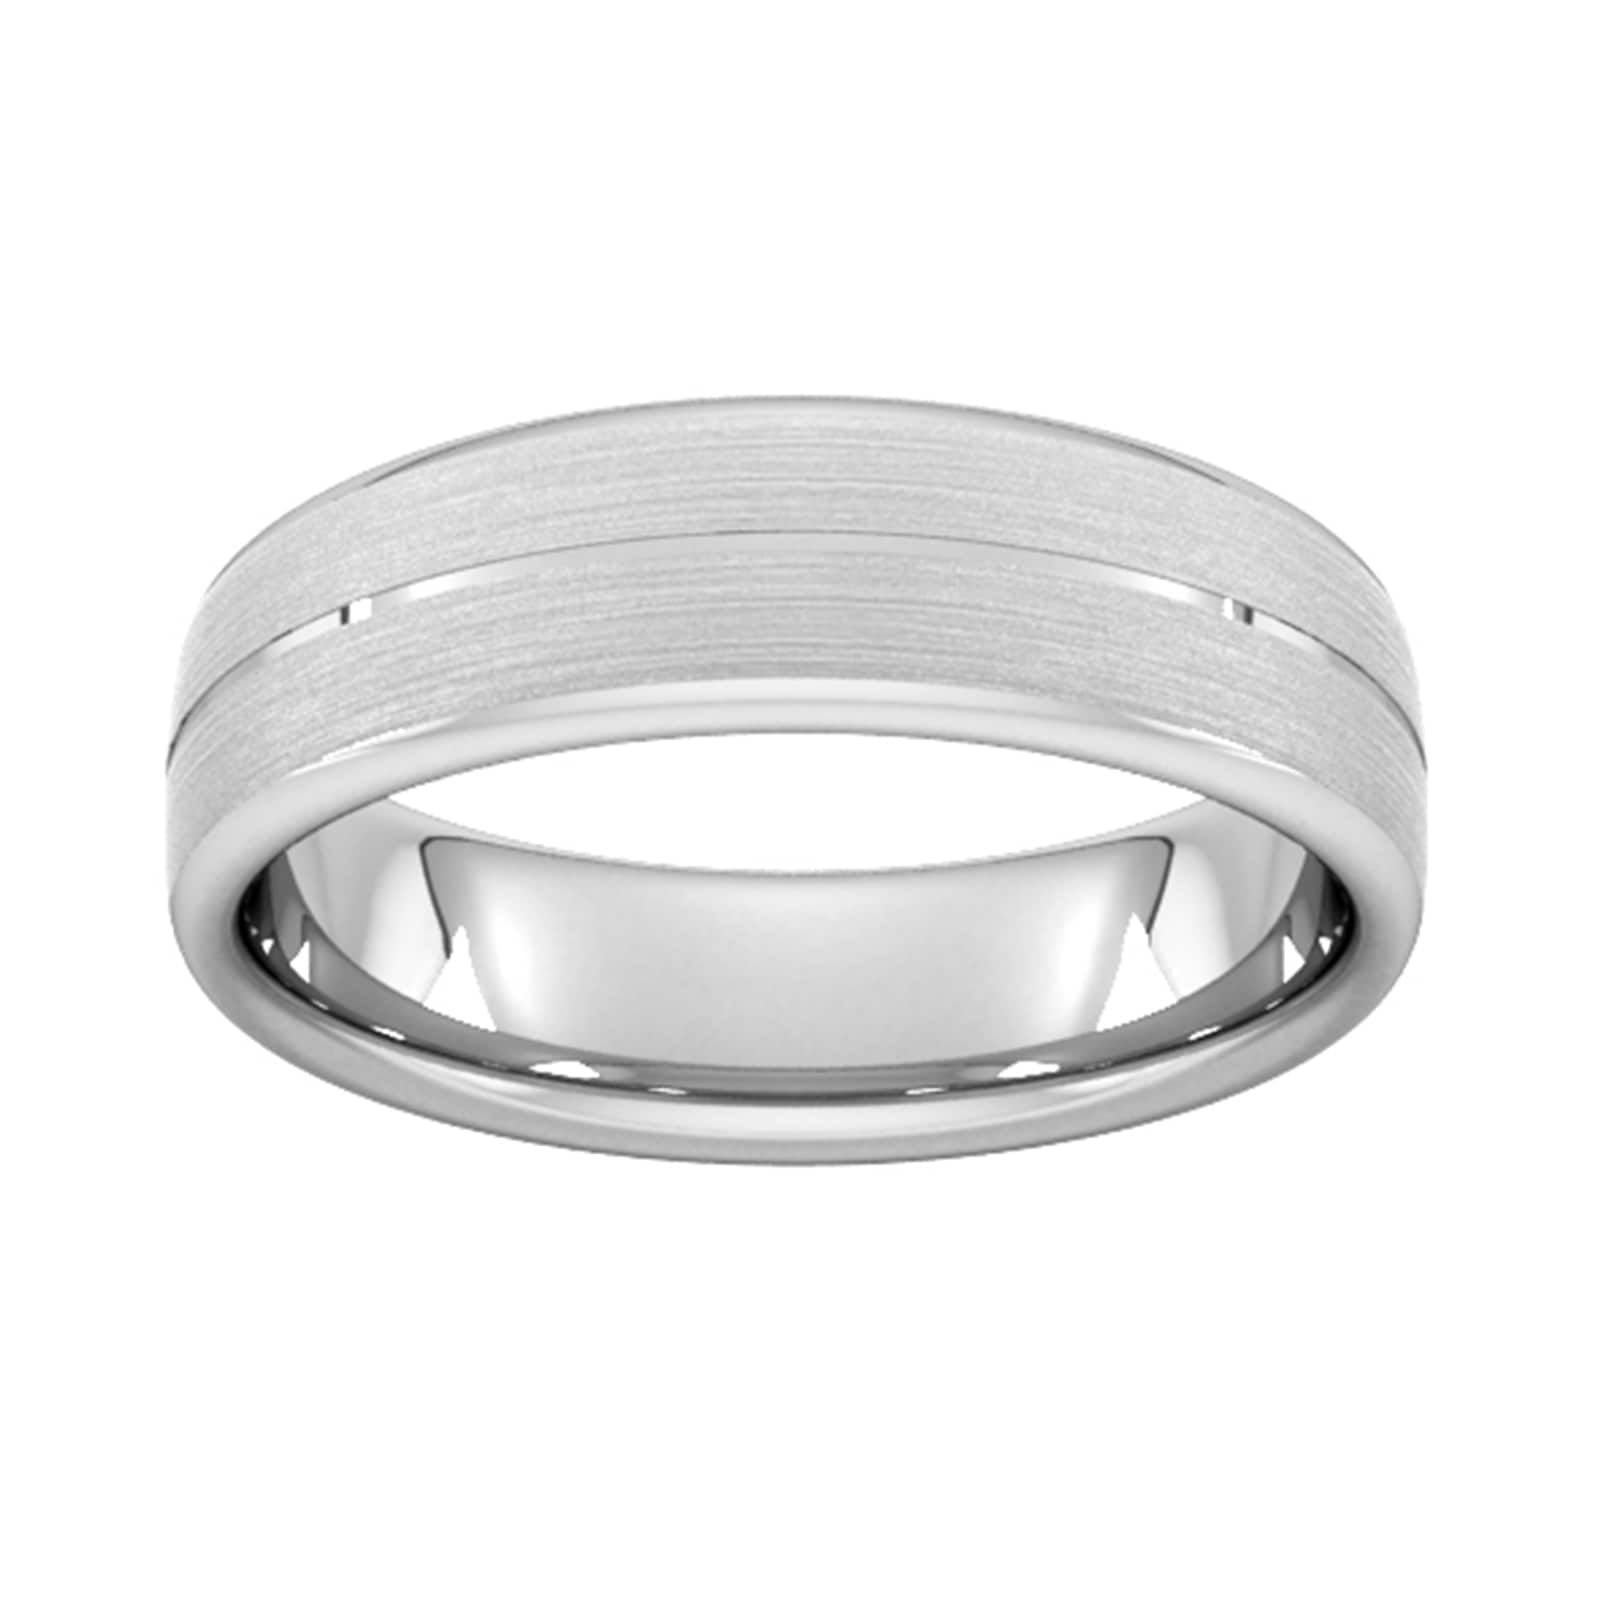 6mm Slight Court Extra Heavy Centre Groove With Chamfered Edge Wedding Ring In 9 Carat White Gold - Ring Size O